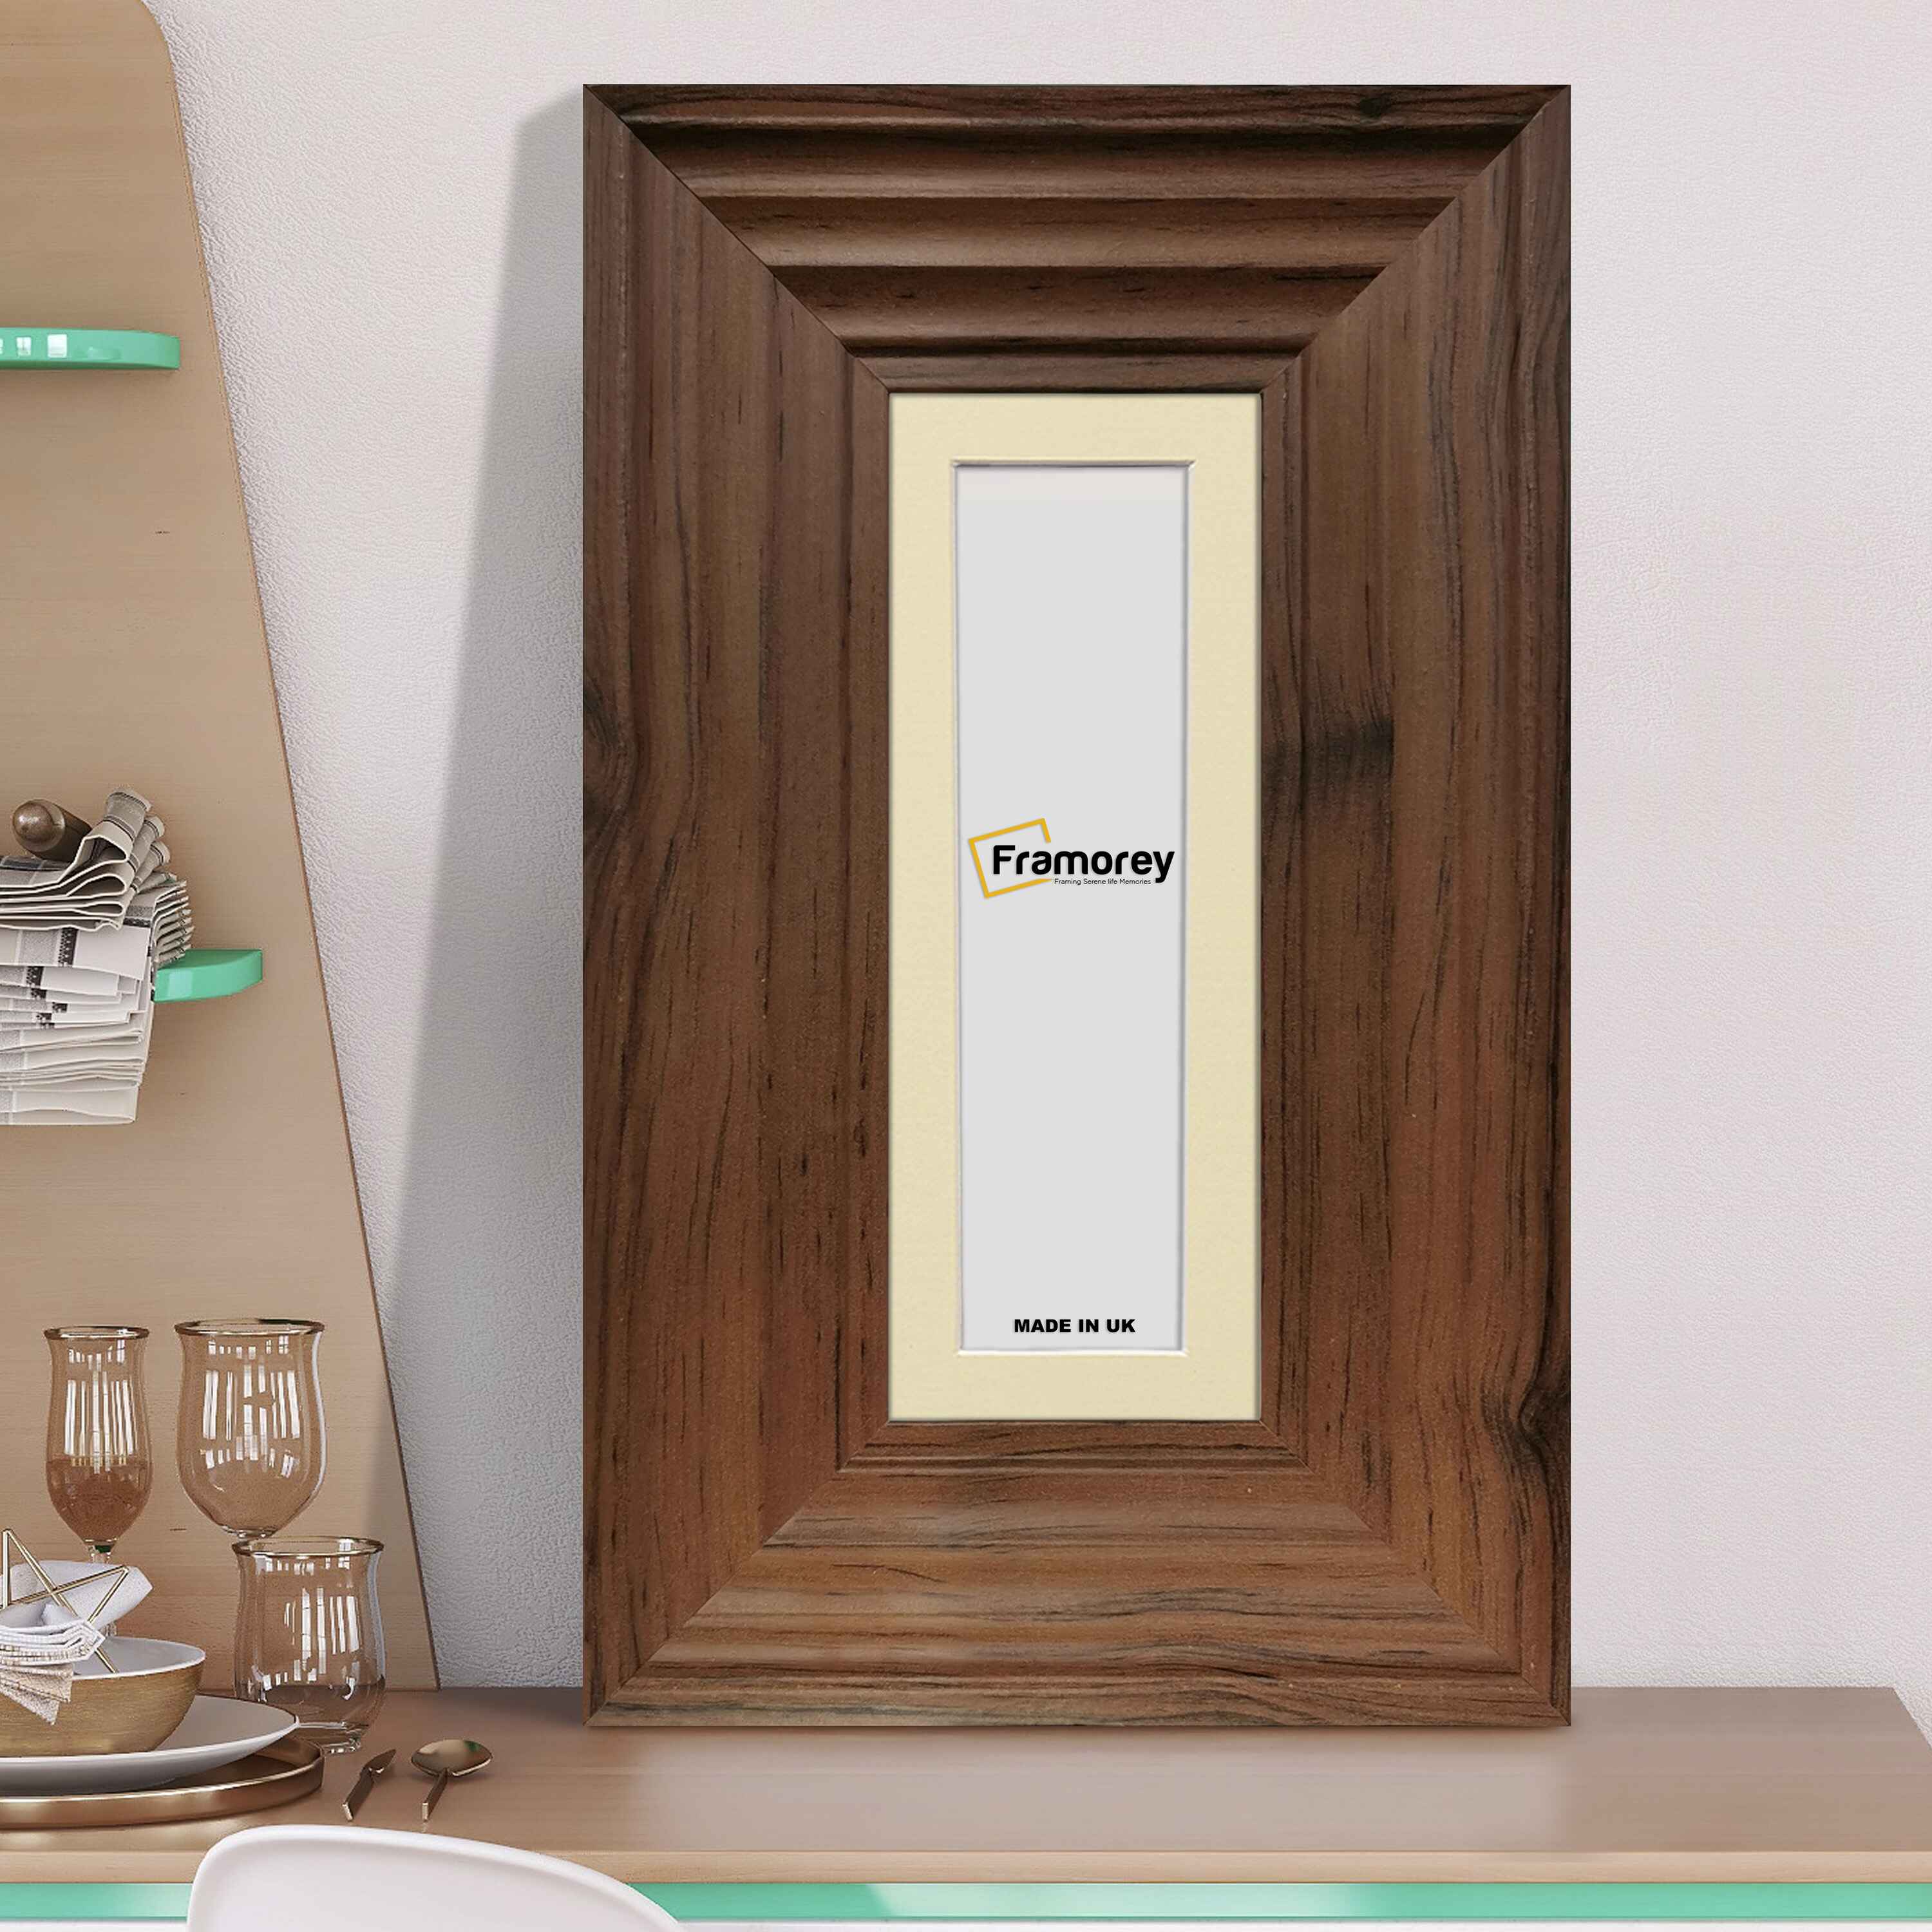 Panoramic Size Walnut Wooden Picture Frame Big Step Style, With Ivory Mount